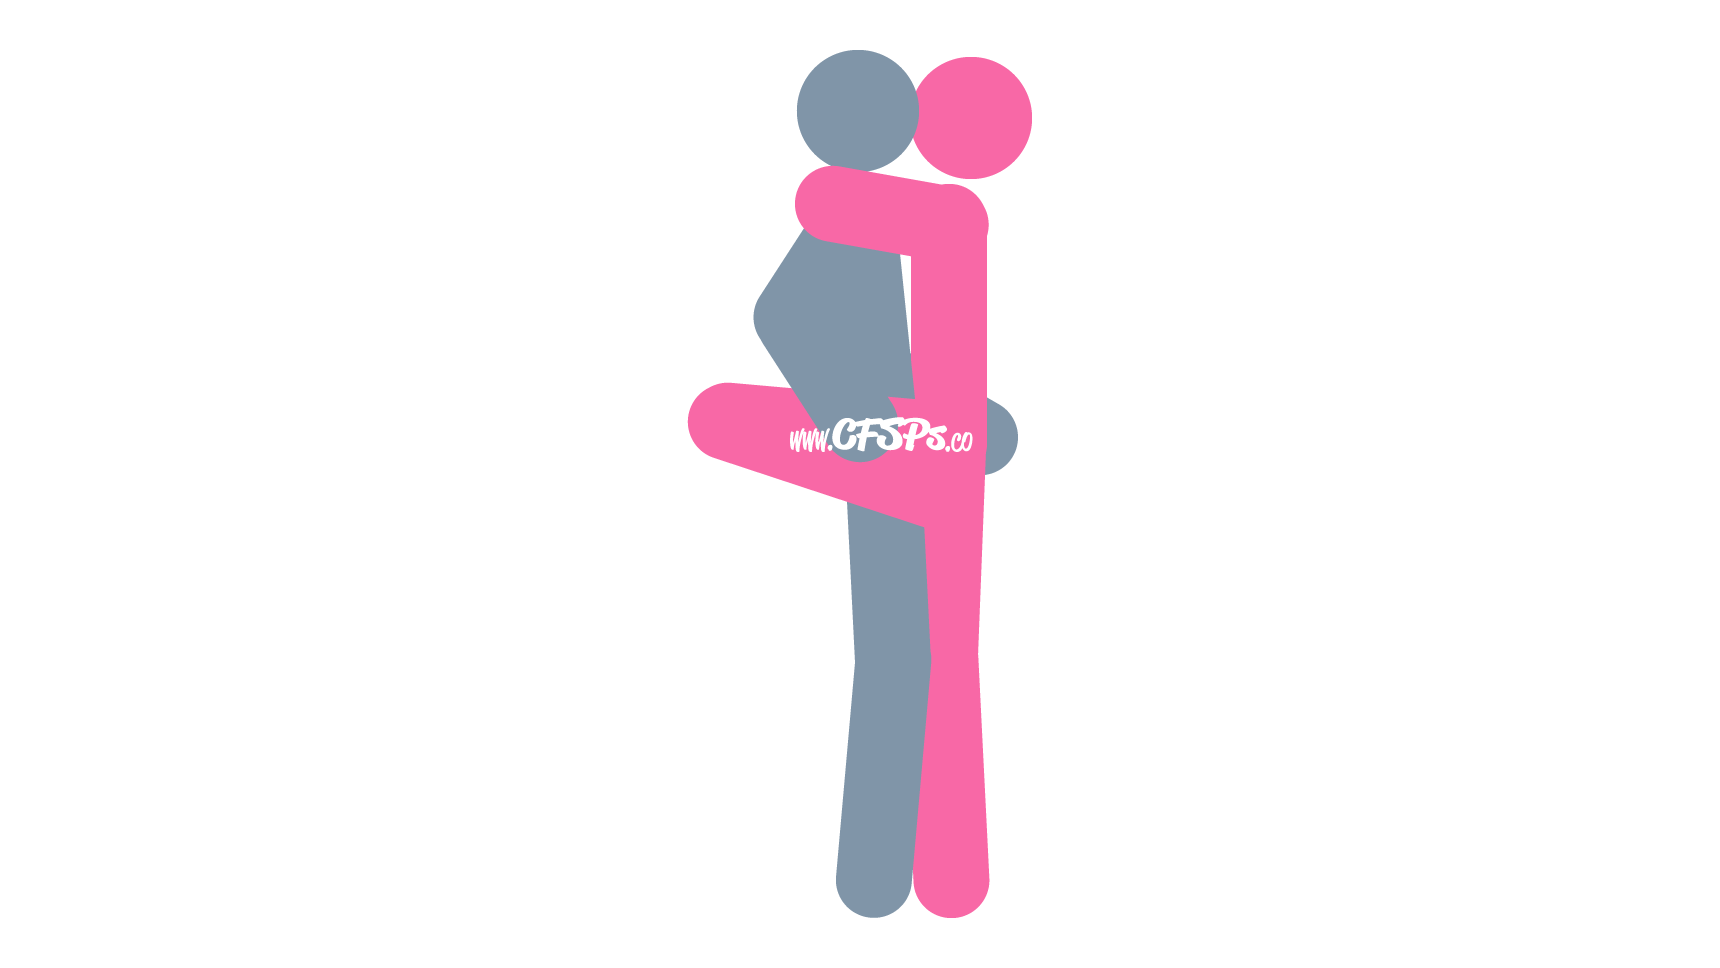 This stick figure image depicts a man and woman having sex in the Dancer sex position. The man is standing with his legs together. The woman is standing before him with one leg lifted at a 90-degree angle and knee bent. The man holds her butt with one hand and her lifted leg with the other, and the woman wraps her arms around his neck.